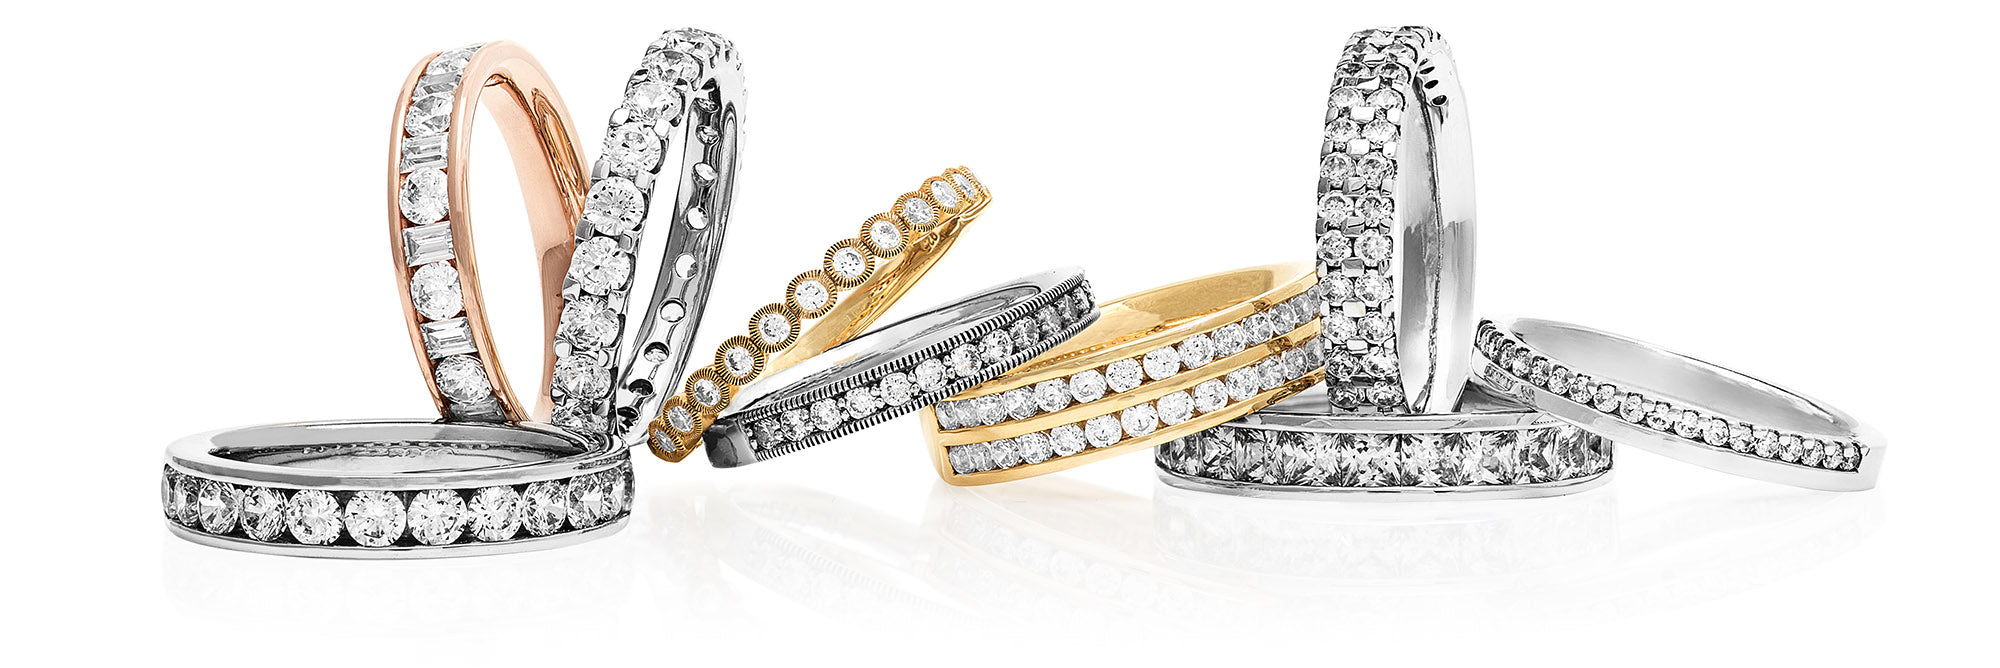 ladies wedding rings in manchester and north west england